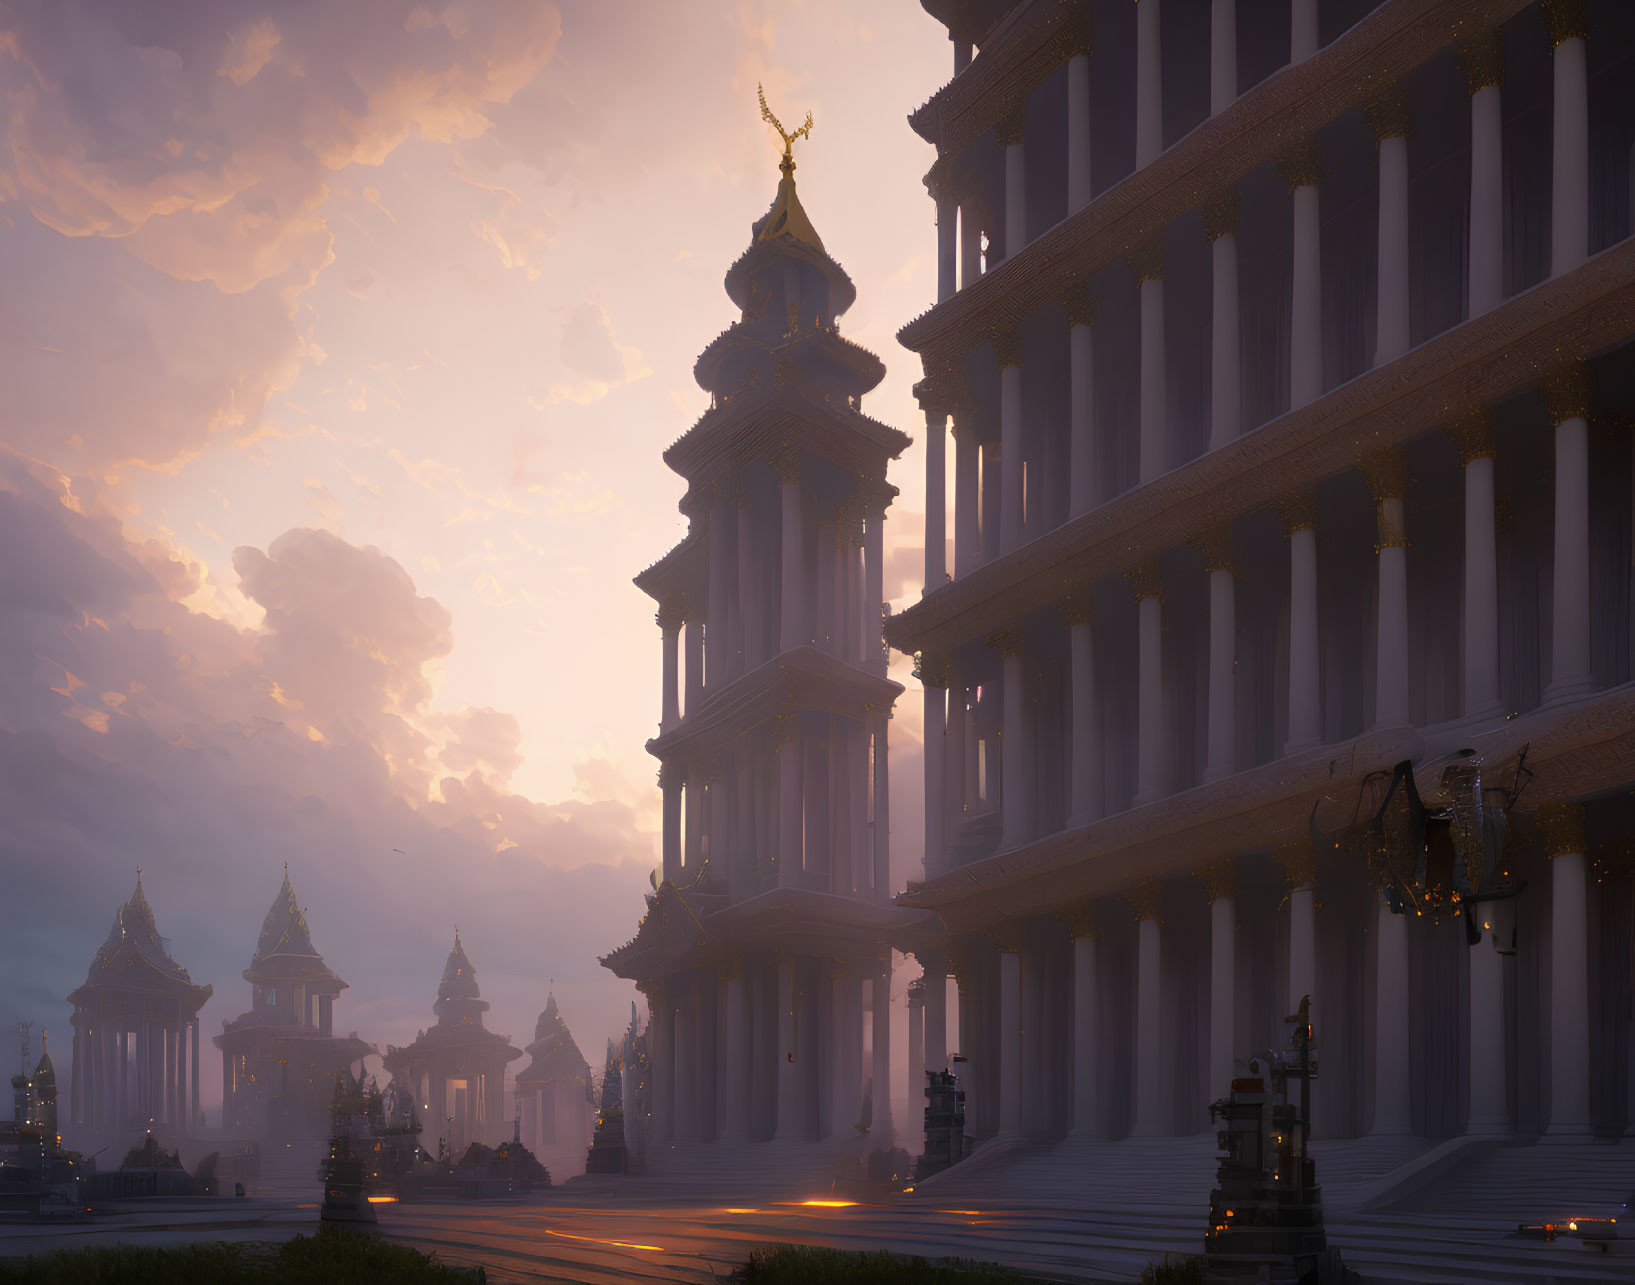 Majestic fantasy architecture with towering spires and golden accents